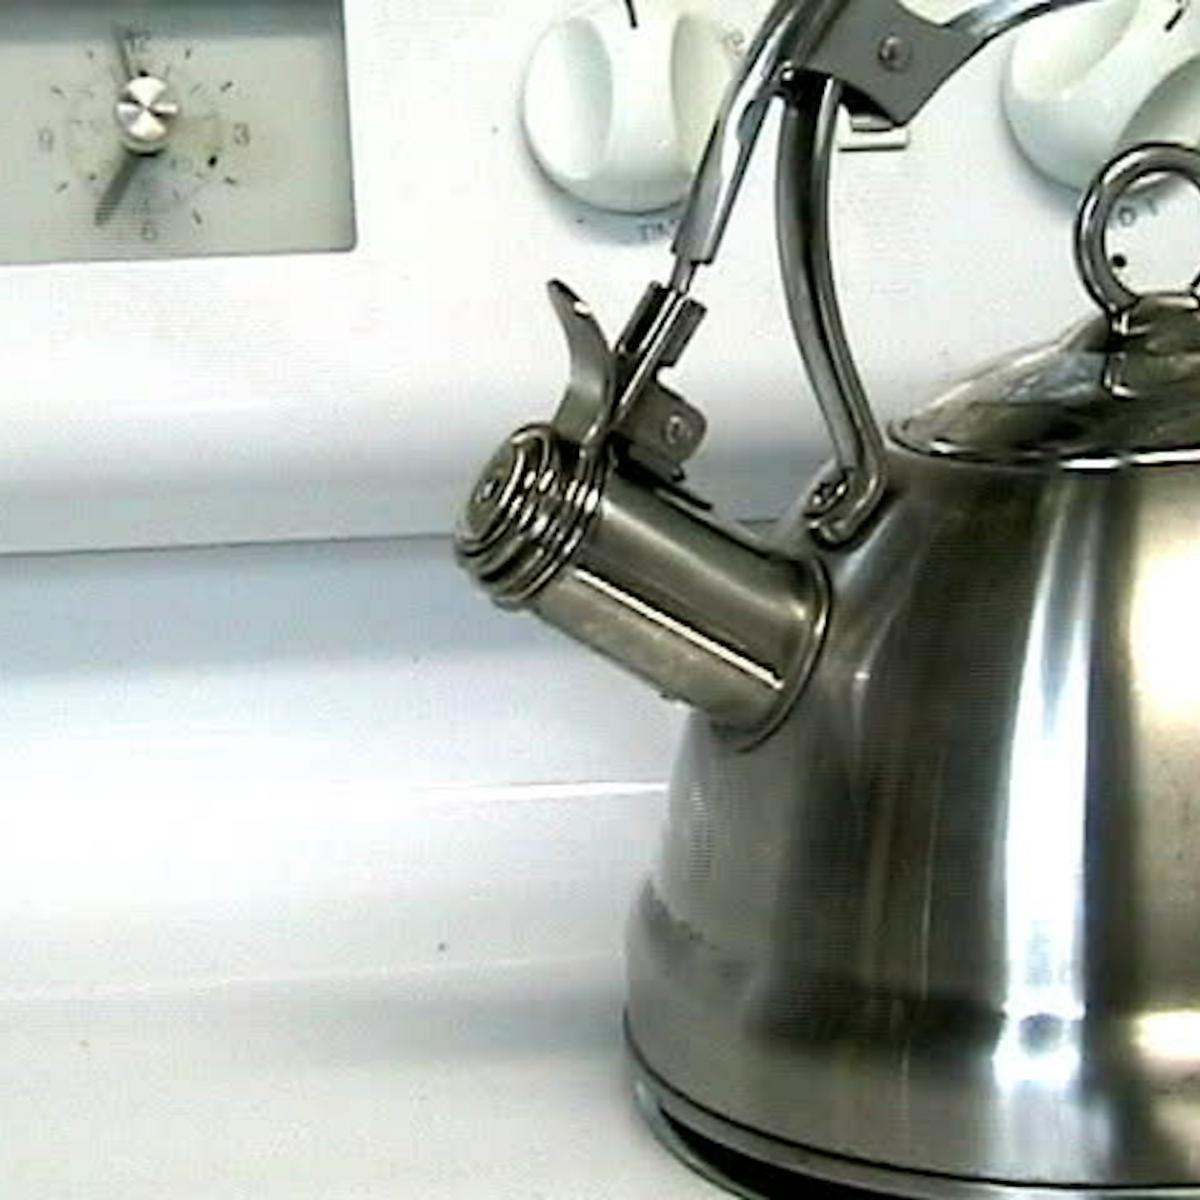 Boiling kettle on gas stove